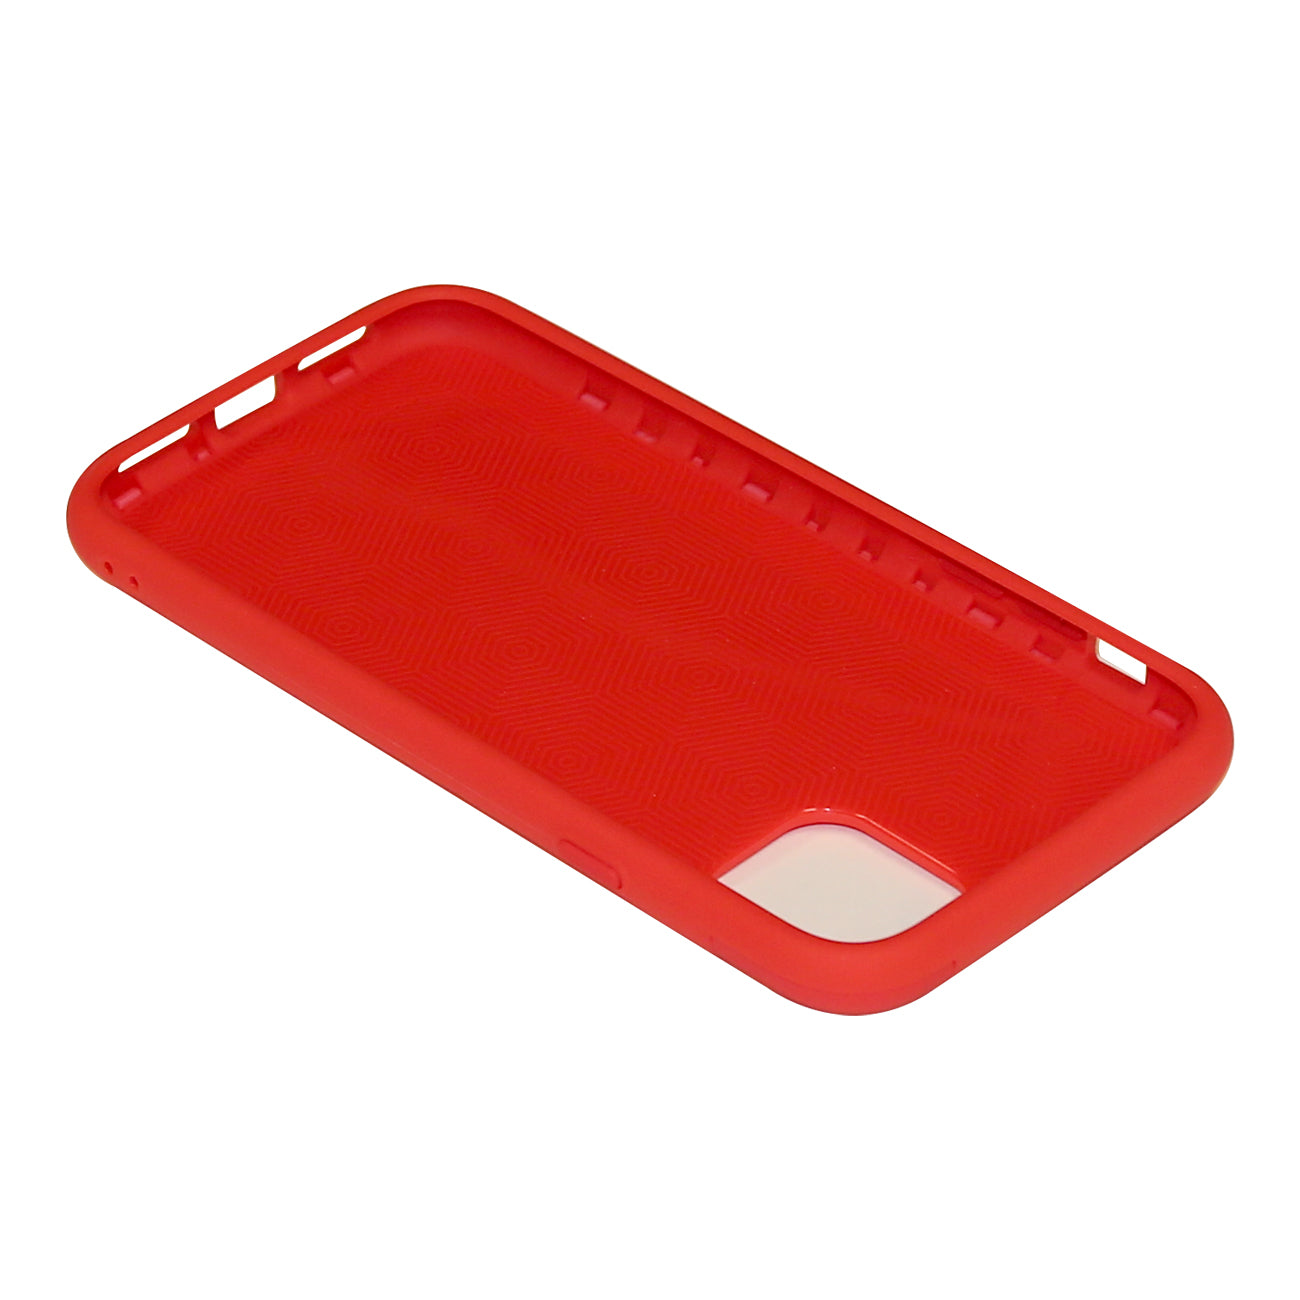 Apple iPhone 11 Pro Max Armor Cases In Red